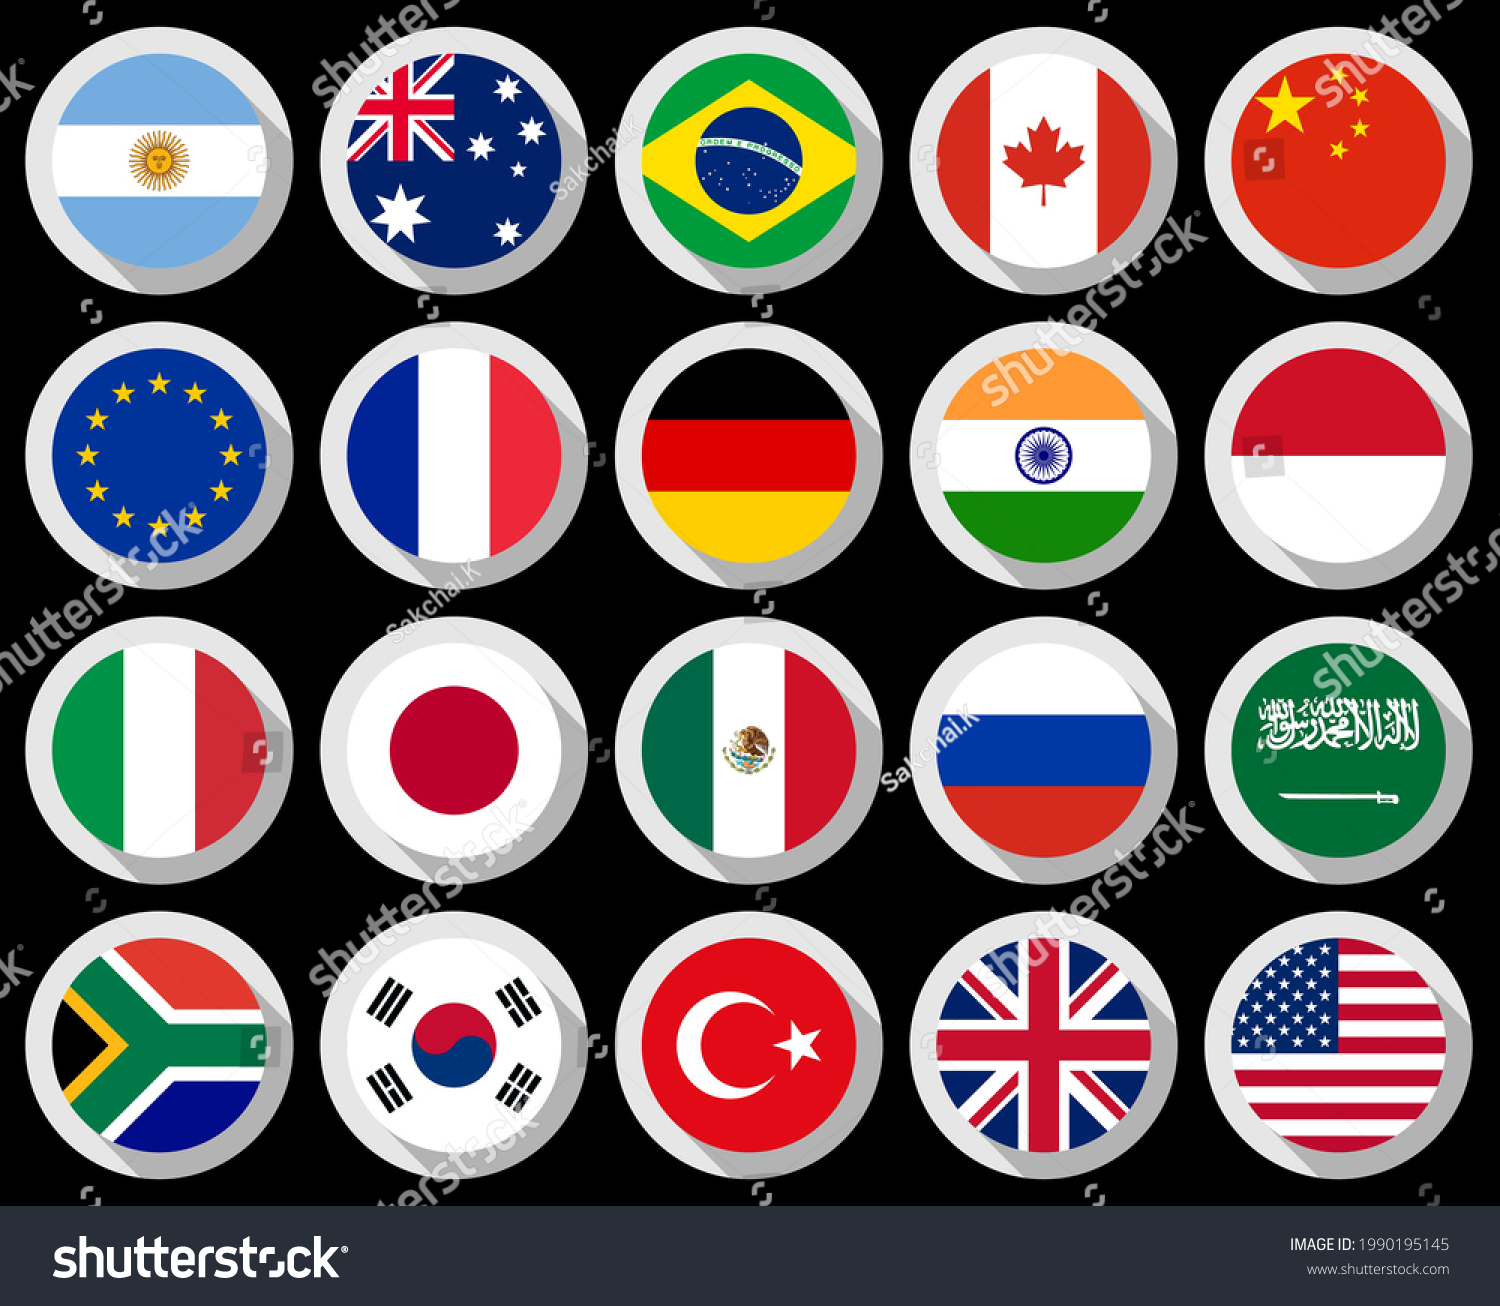 G20 Countries Flags Round Icon Flag Set Royalty Free Stock Vector 1990195145 2749